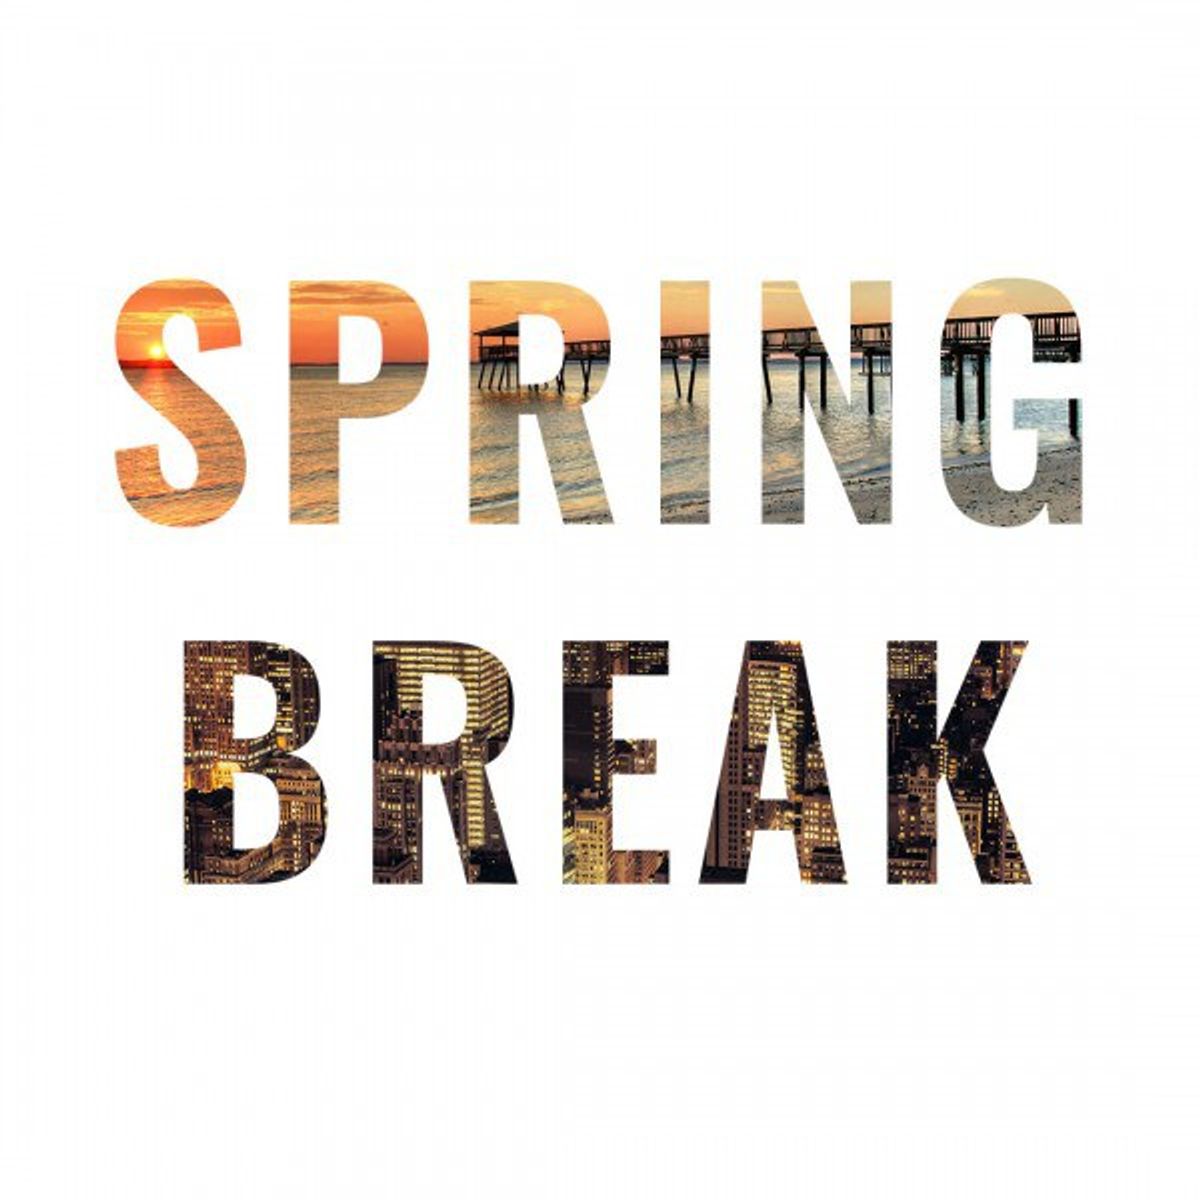 7 Things You'll Find Every College Student Doing During Spring Break